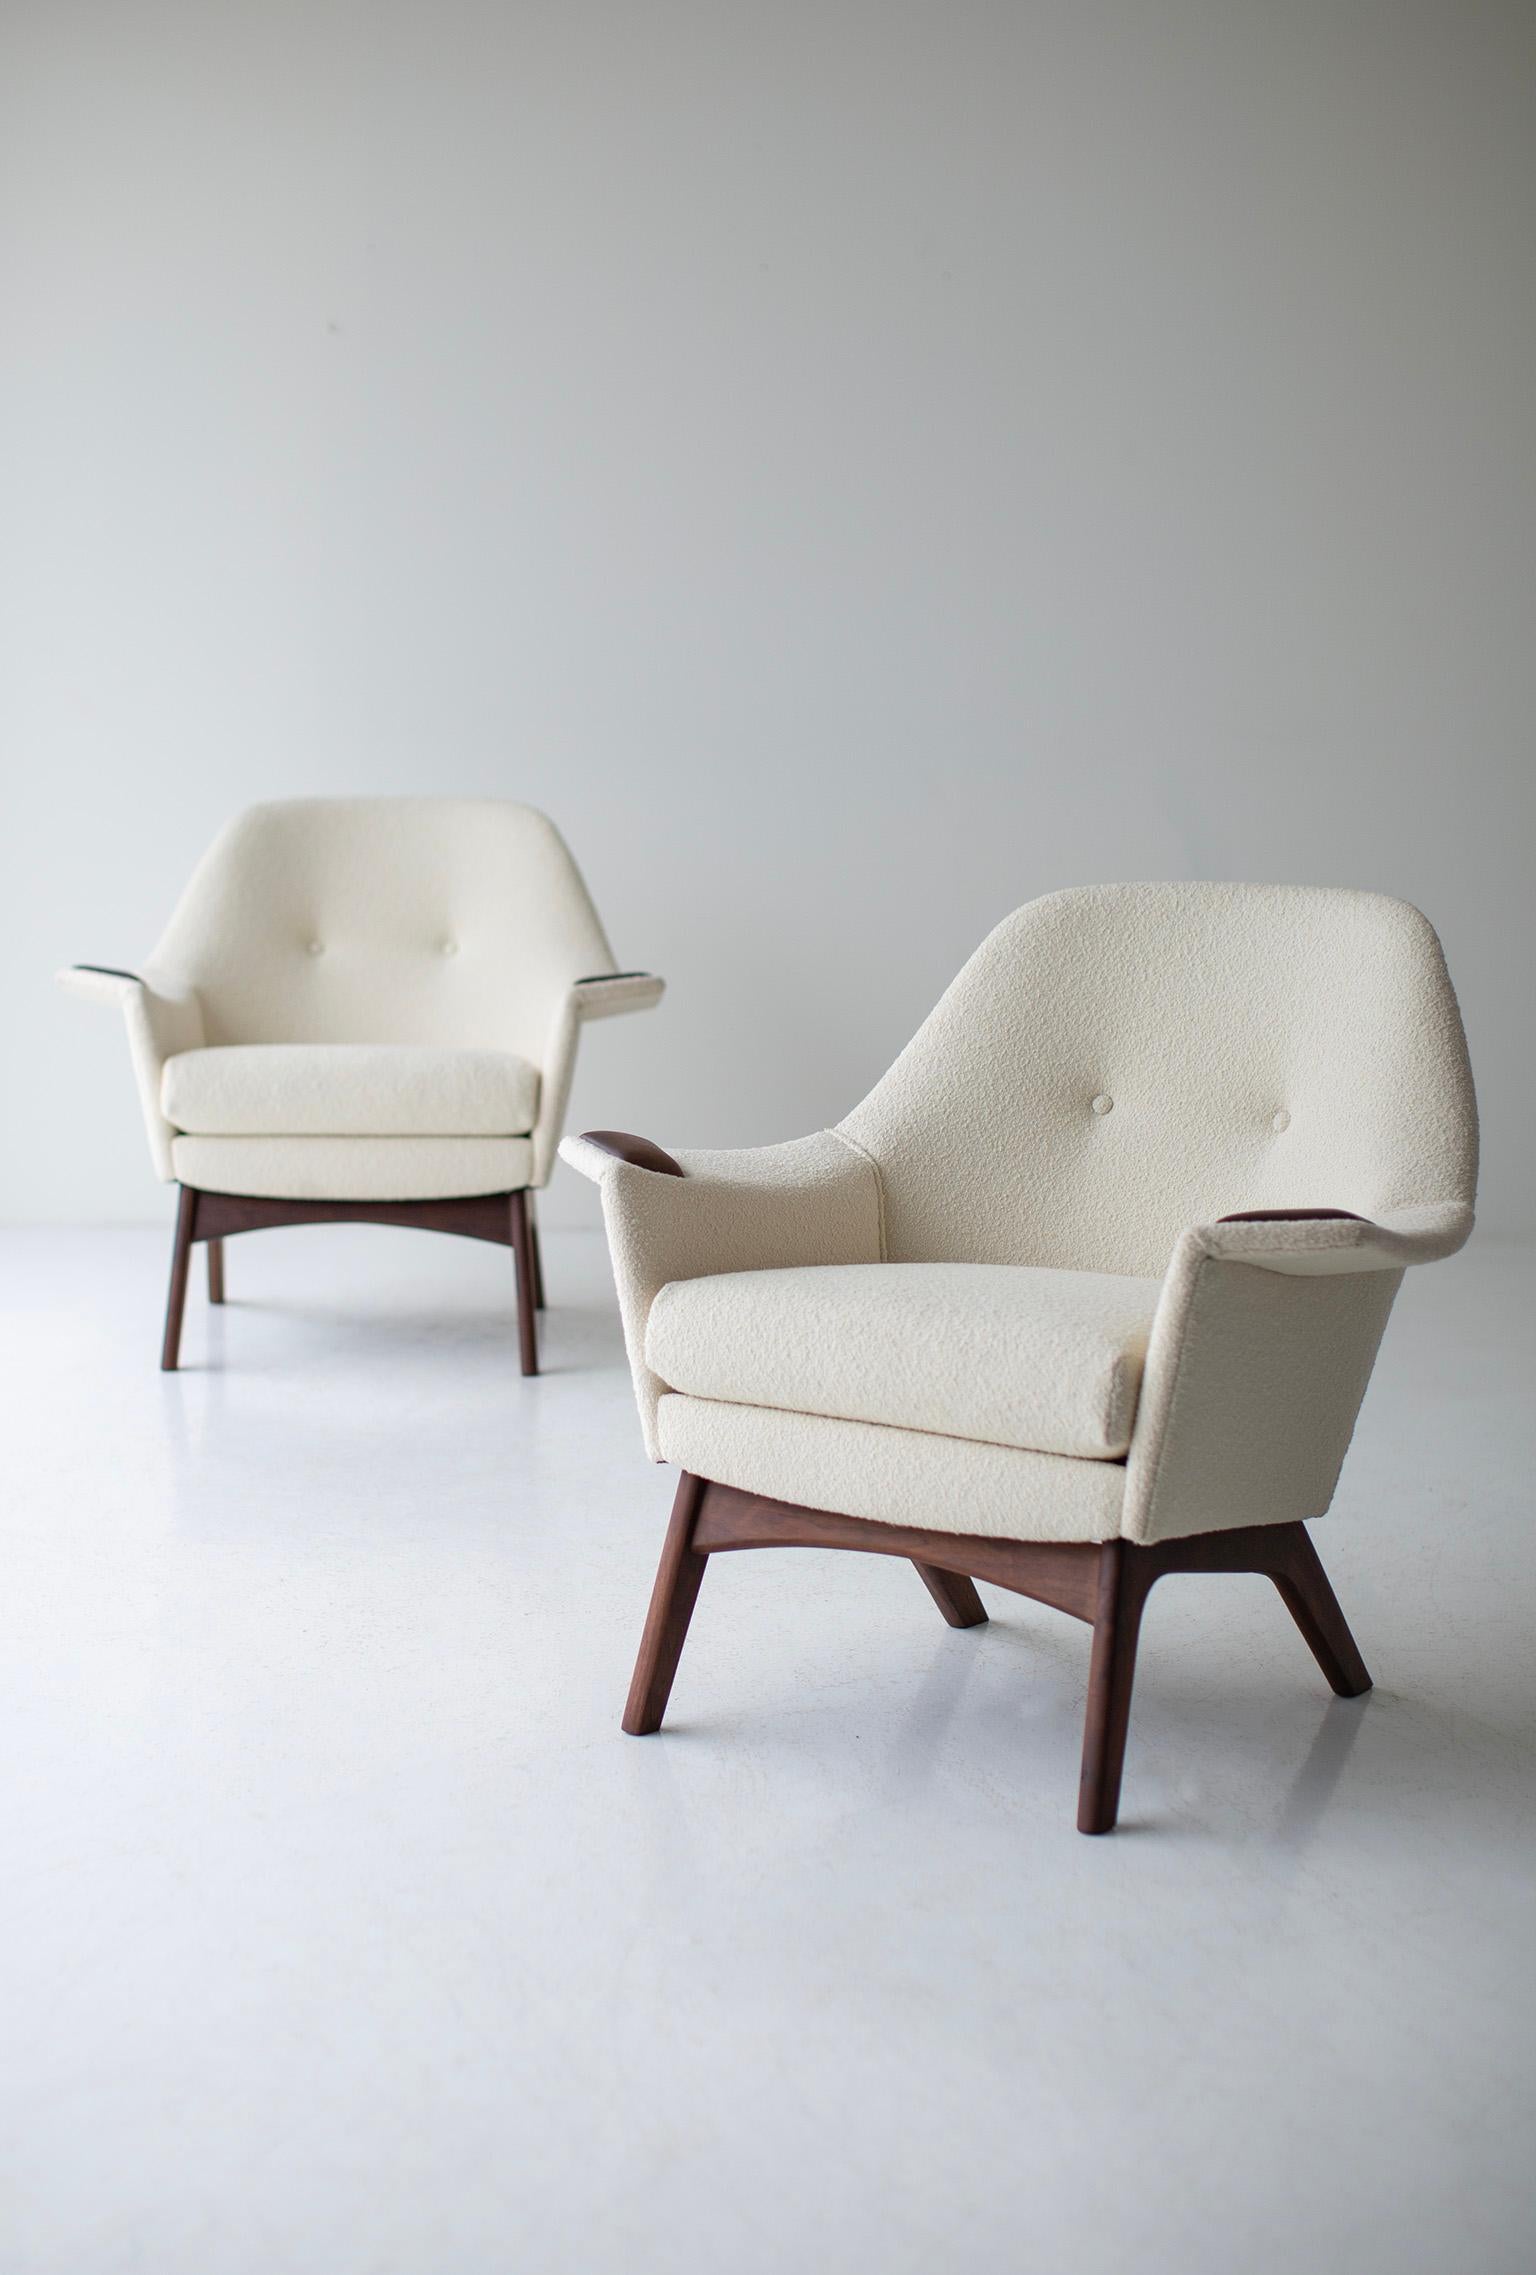 Mid-Century Modern Swanky Adrian Pearsall Lounge Chairs for Craft Associates Inc in Knoll Boucle